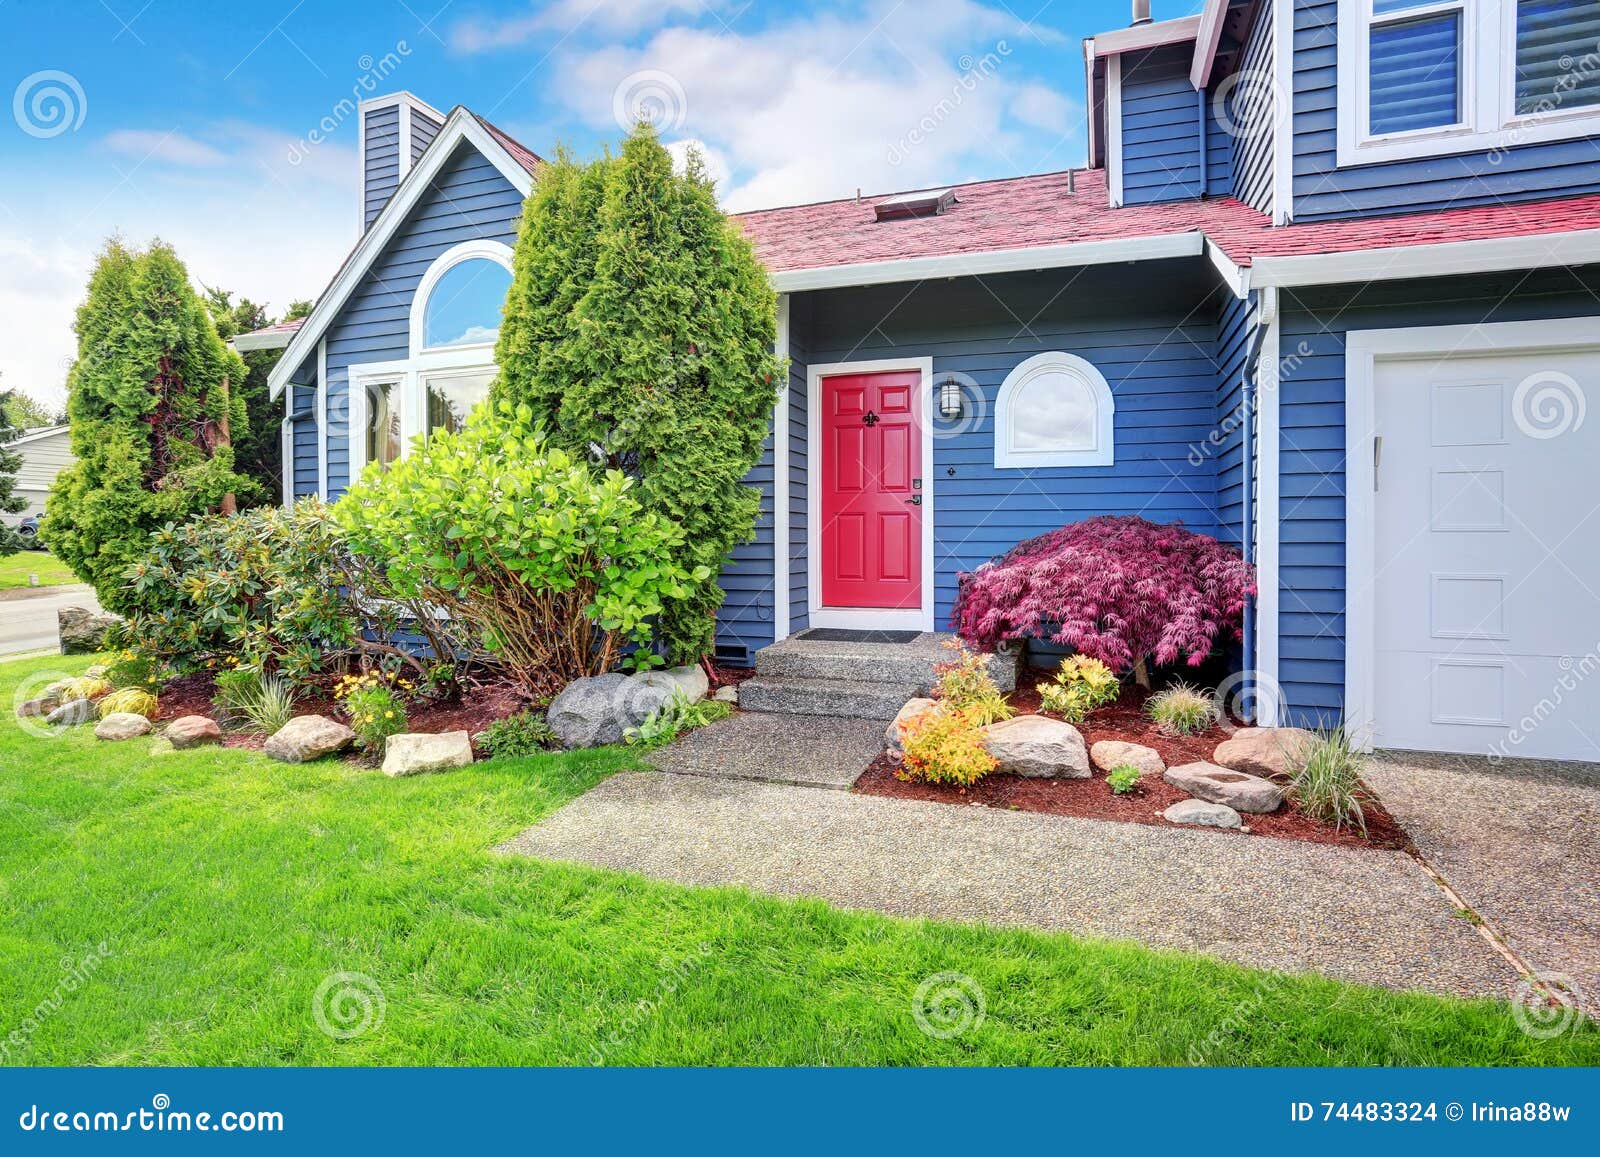 beautiful curb appeal with blue exterior paint and red roof.